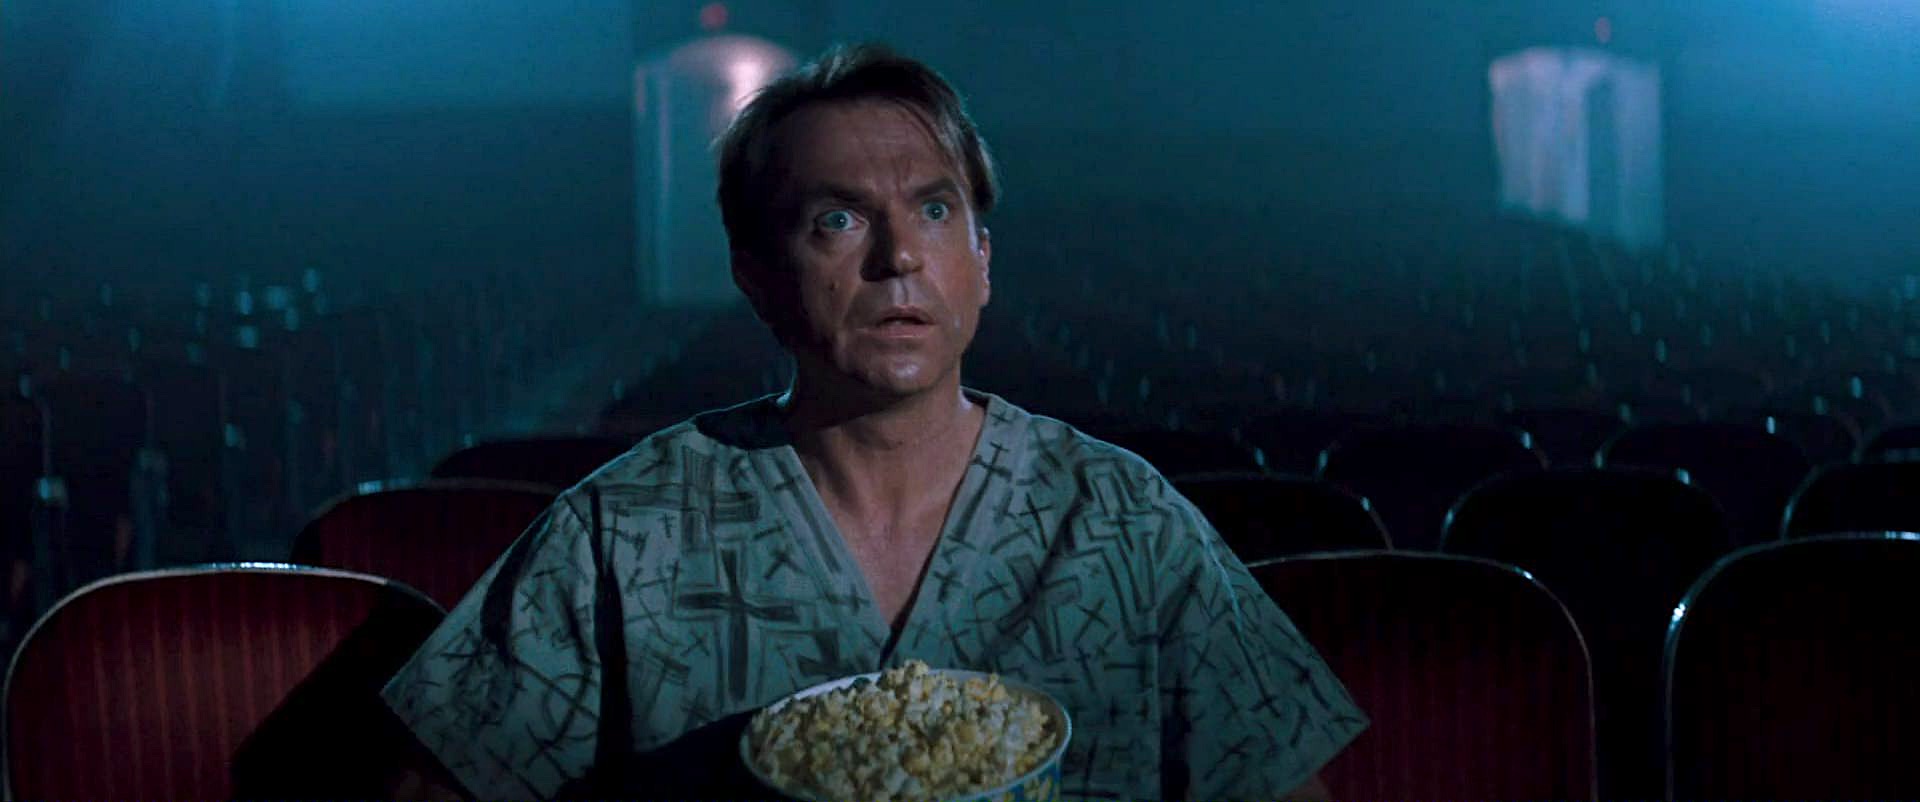 Sam Neill, sitting in a movie theater alone with a tub of popcorn, gapes at the screen in awe in the movie In the Mouth of Madness